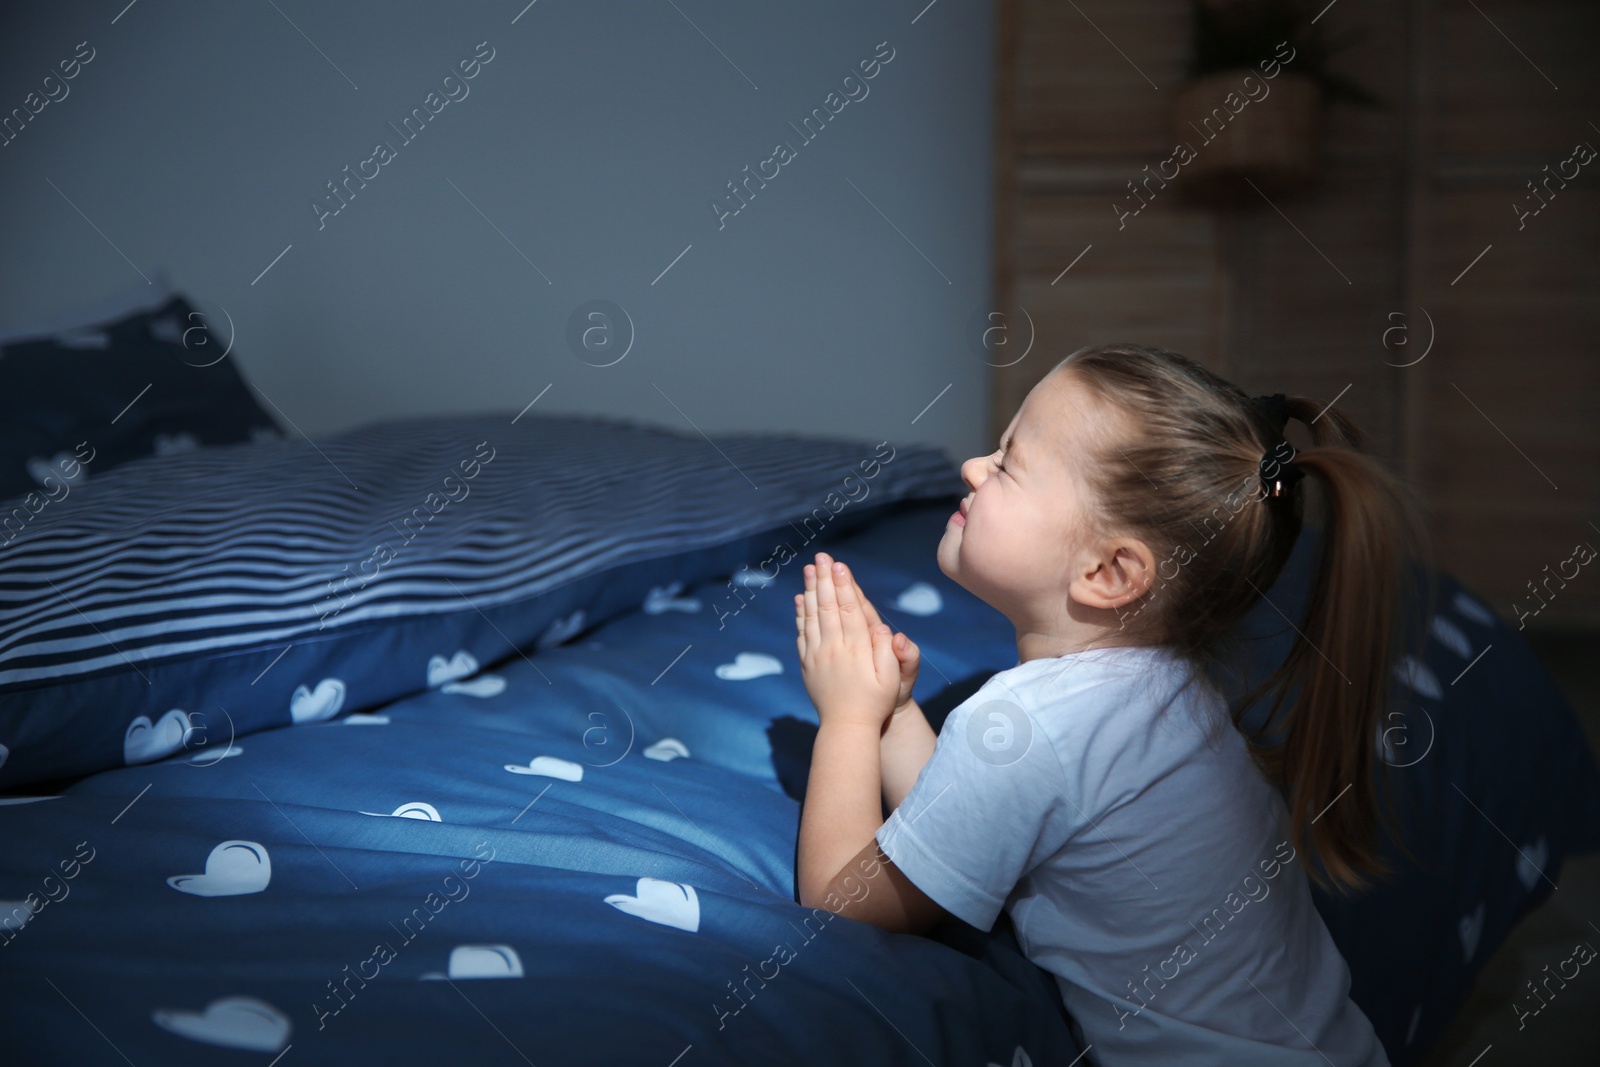 Photo of Little girl saying bedtime prayer near bed in room at night